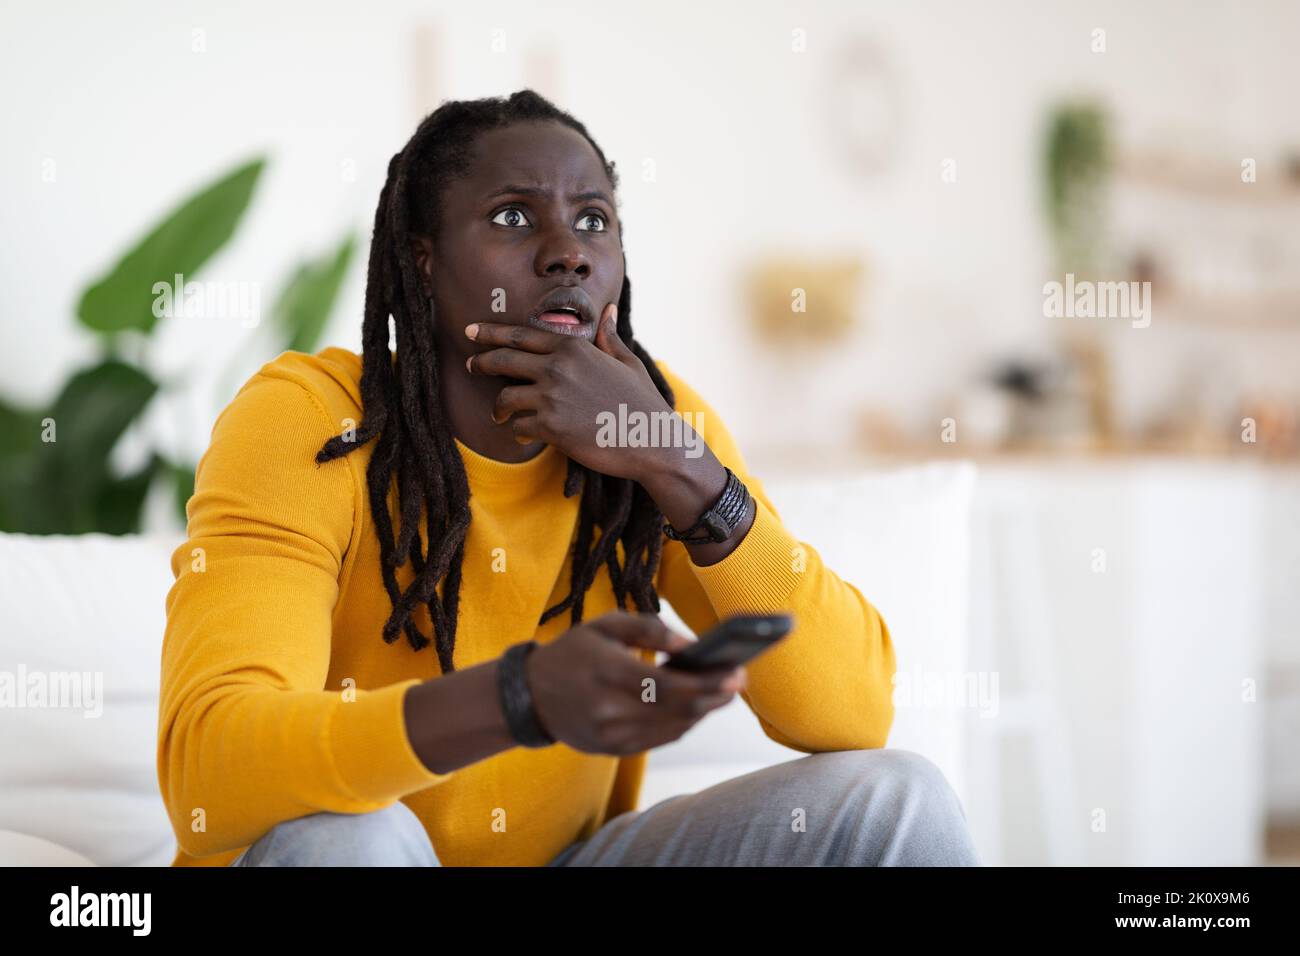 Portrait Of Shocked Black Man With Remote Controller In Hand At Home Stock Photo